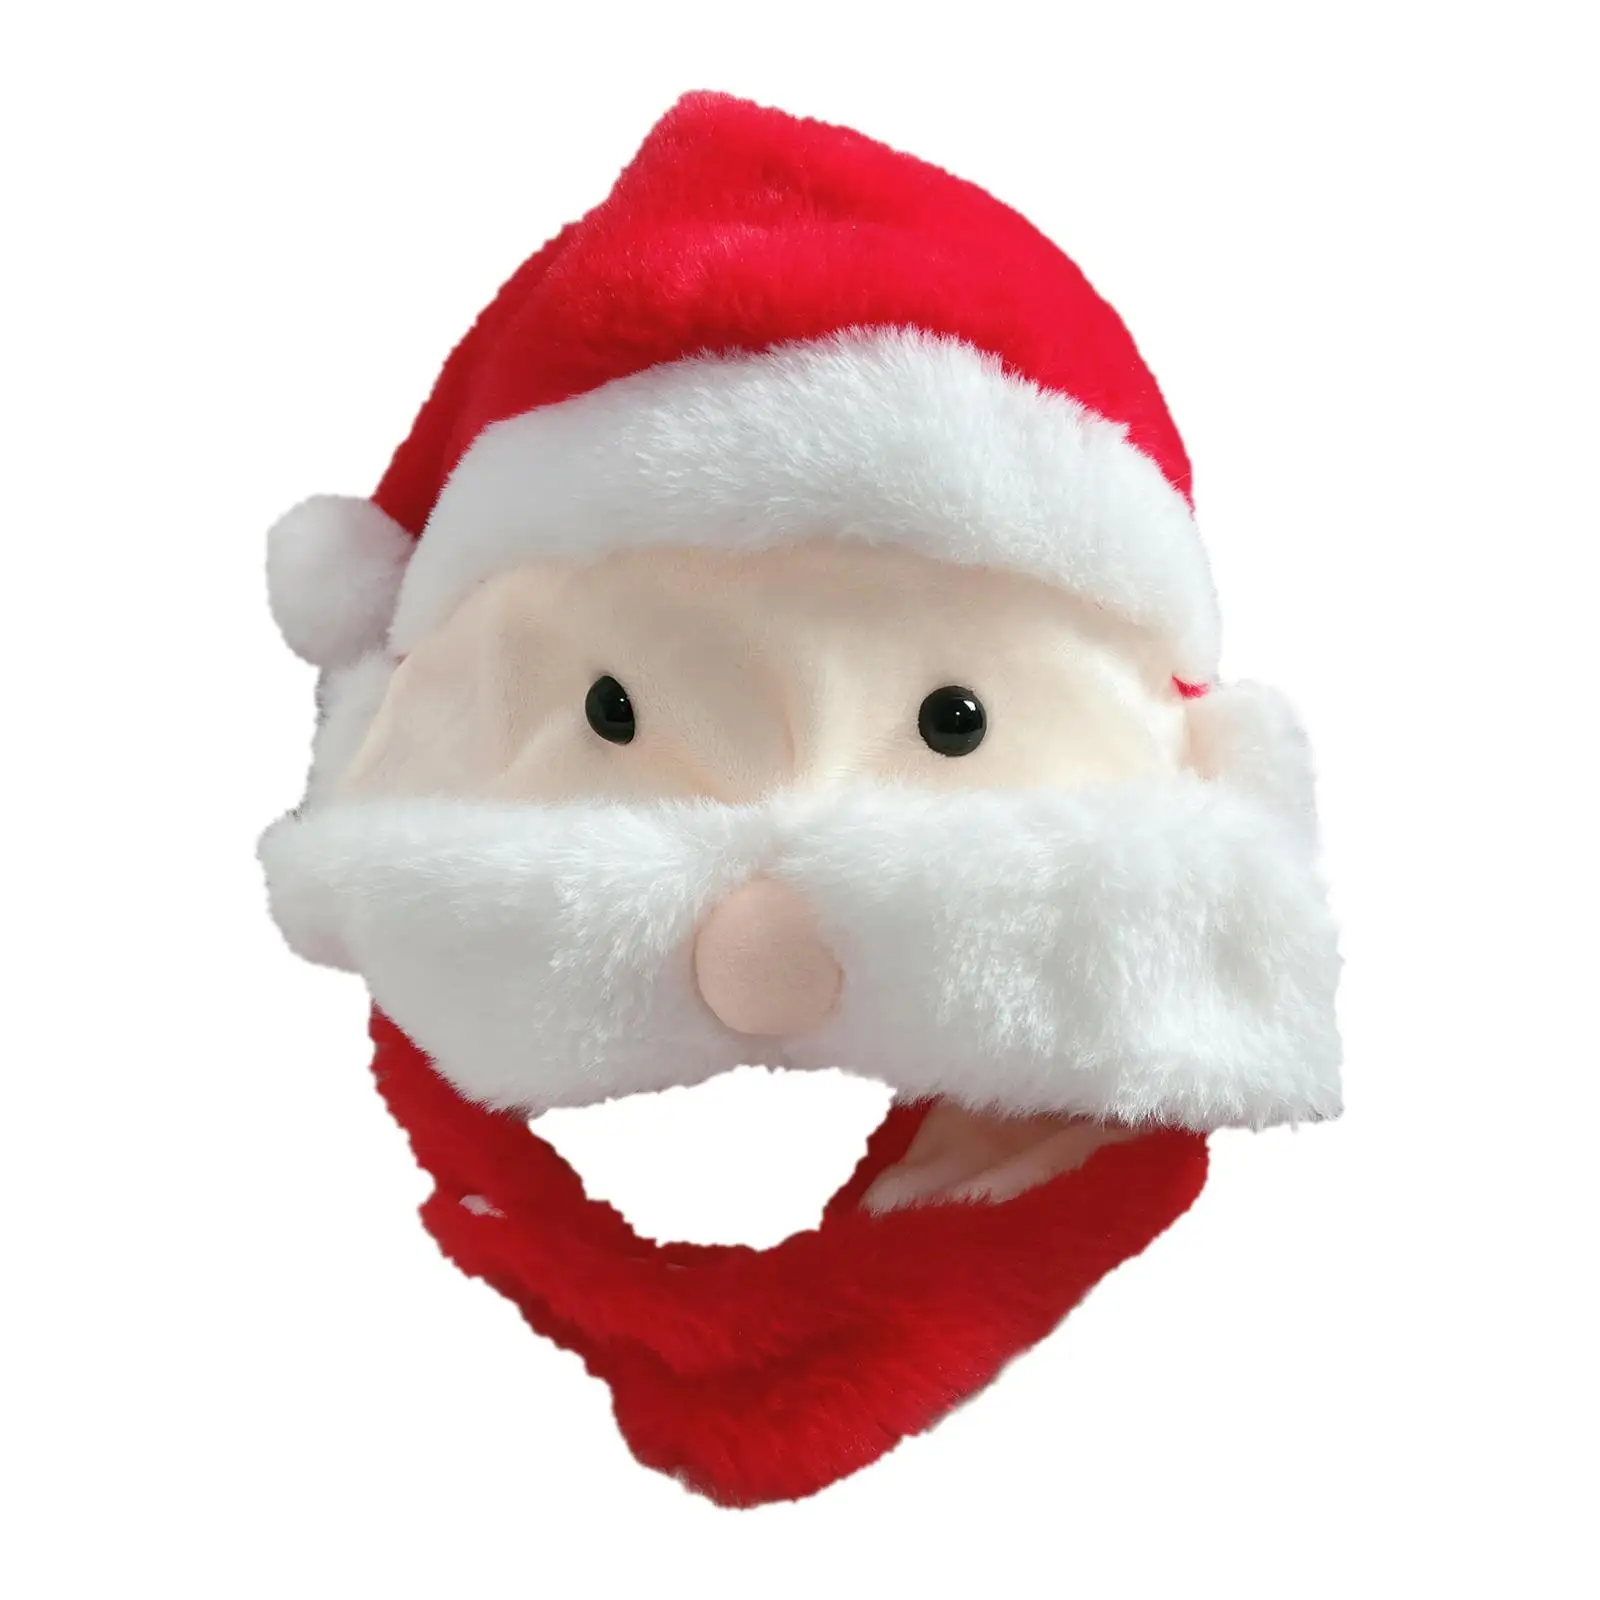 Lovely Christmas Plush Hat Holiday Decorations Creative Adult Kids Winter Headgear Warm Soft for Dress Costume New Year Festival